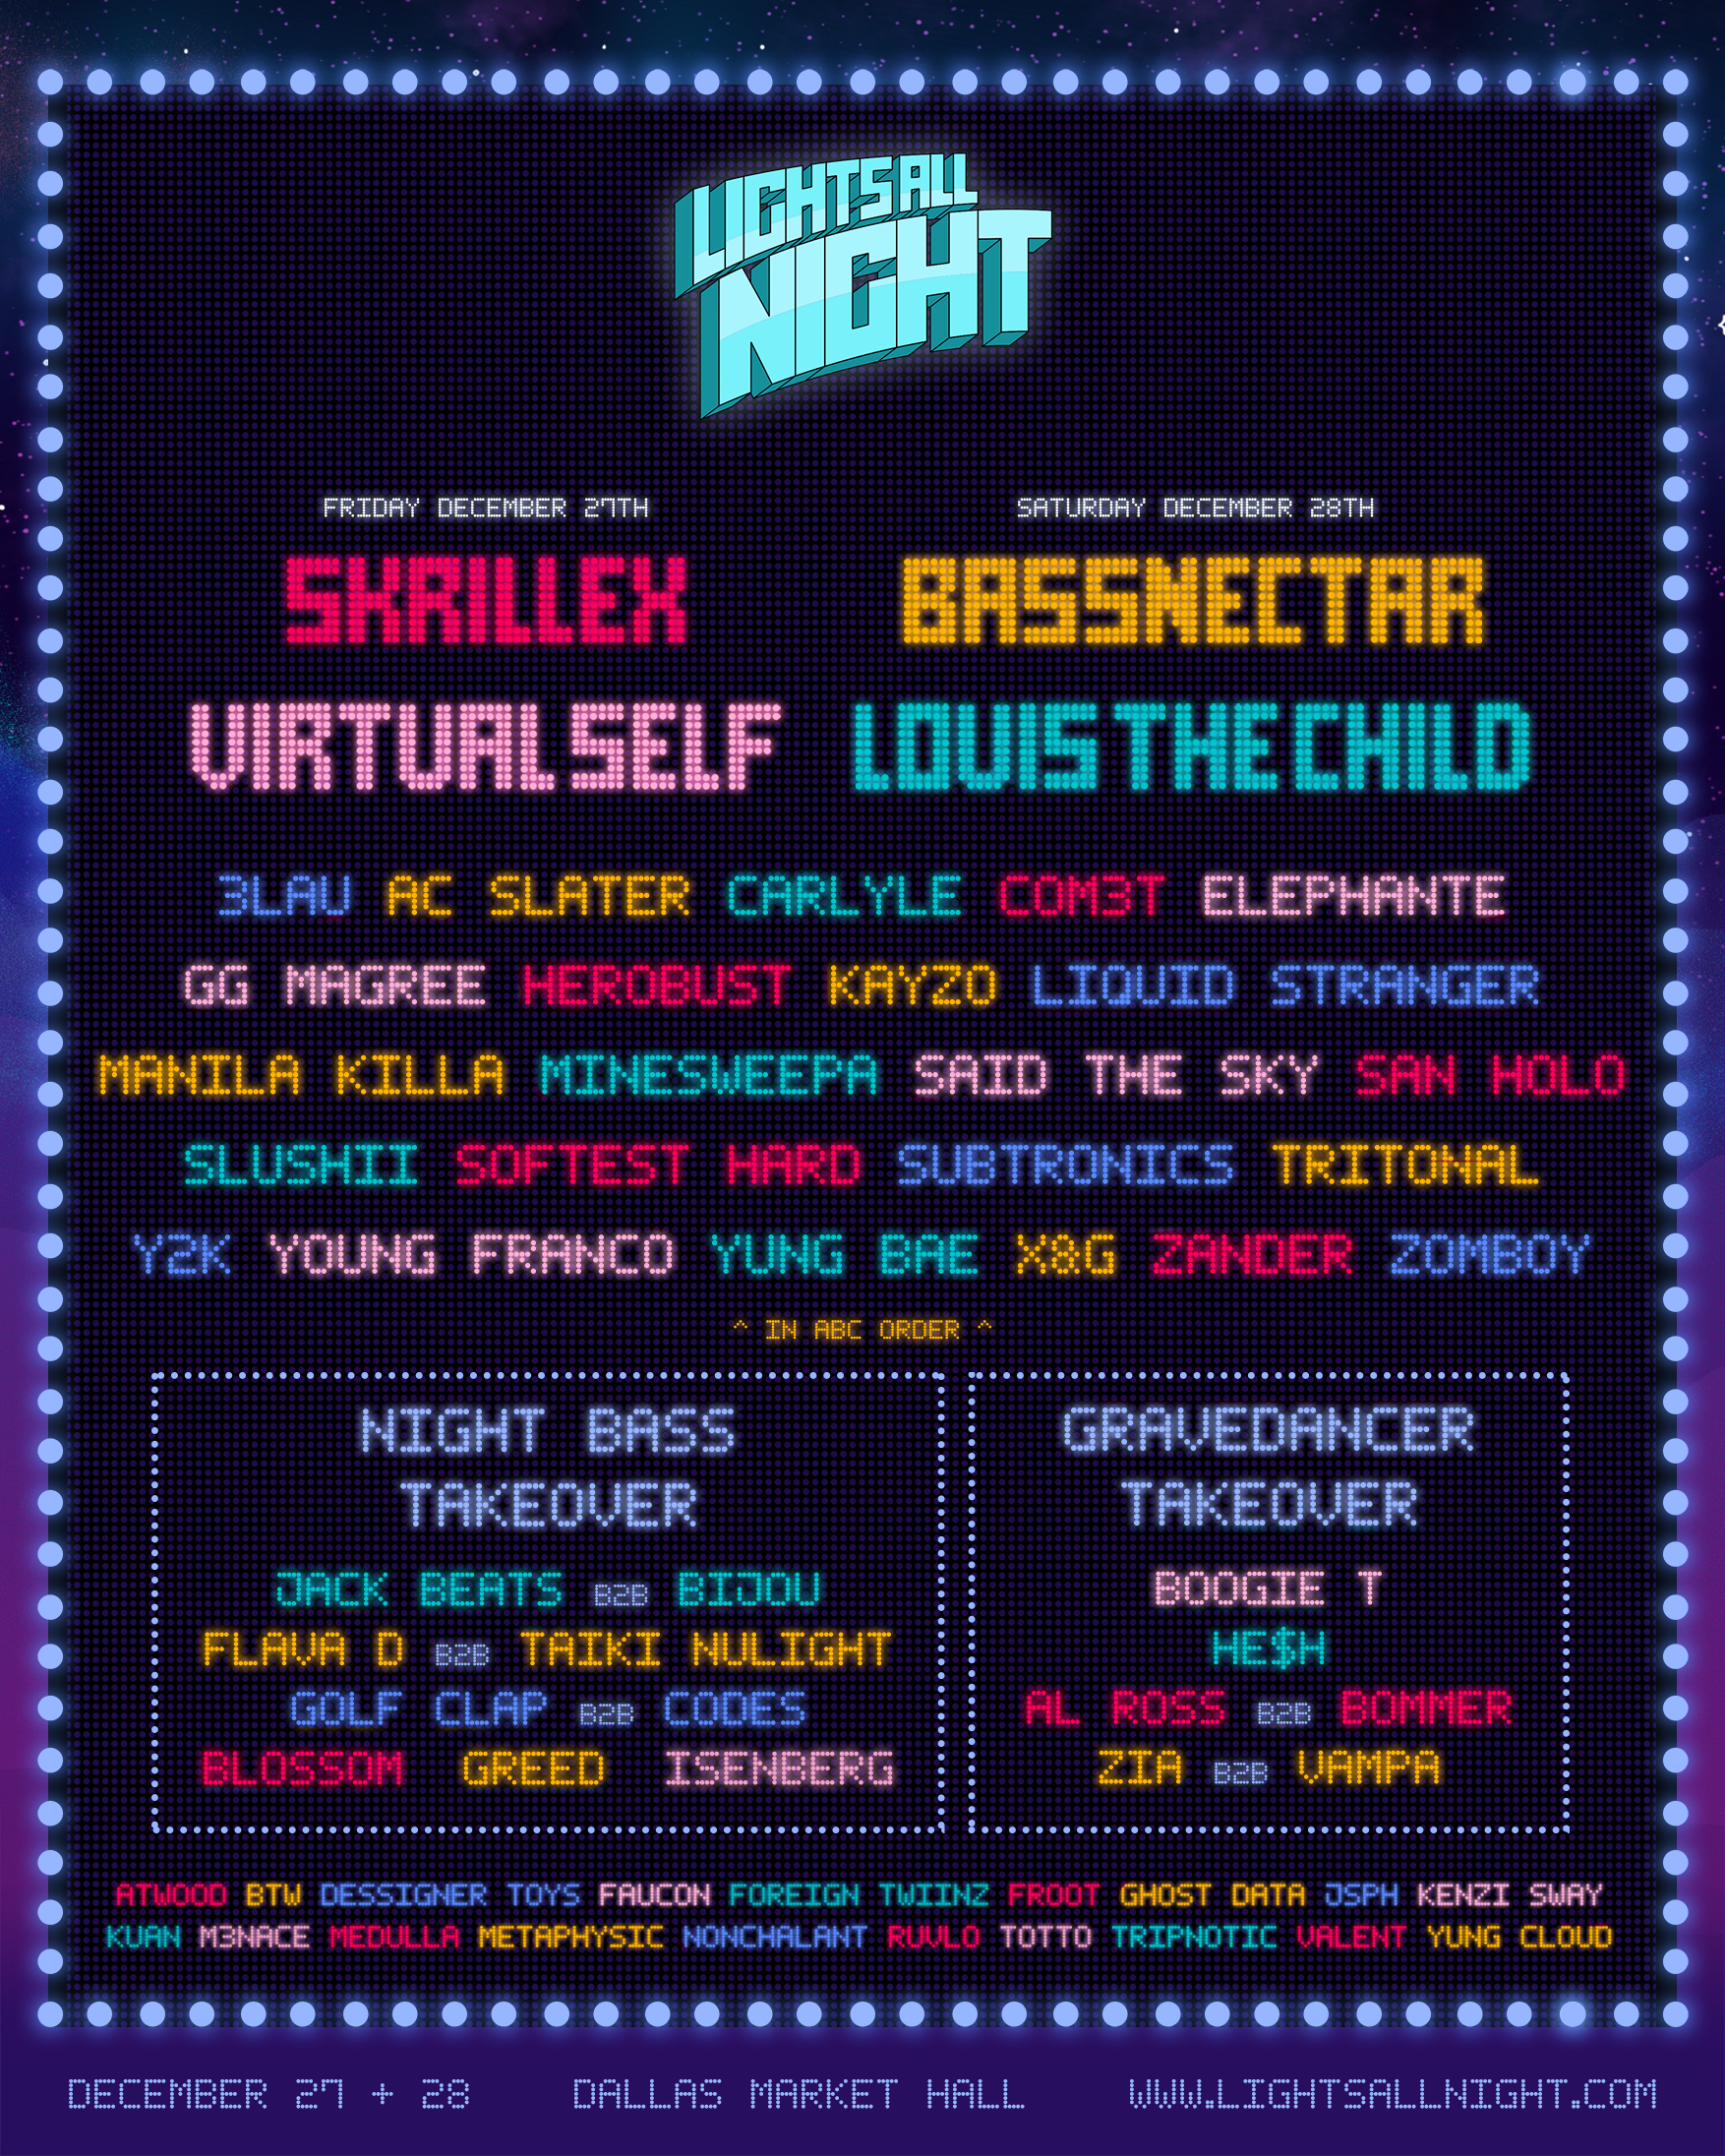 Lights All Night Reveals Final Details for 10th Anniversary Festival